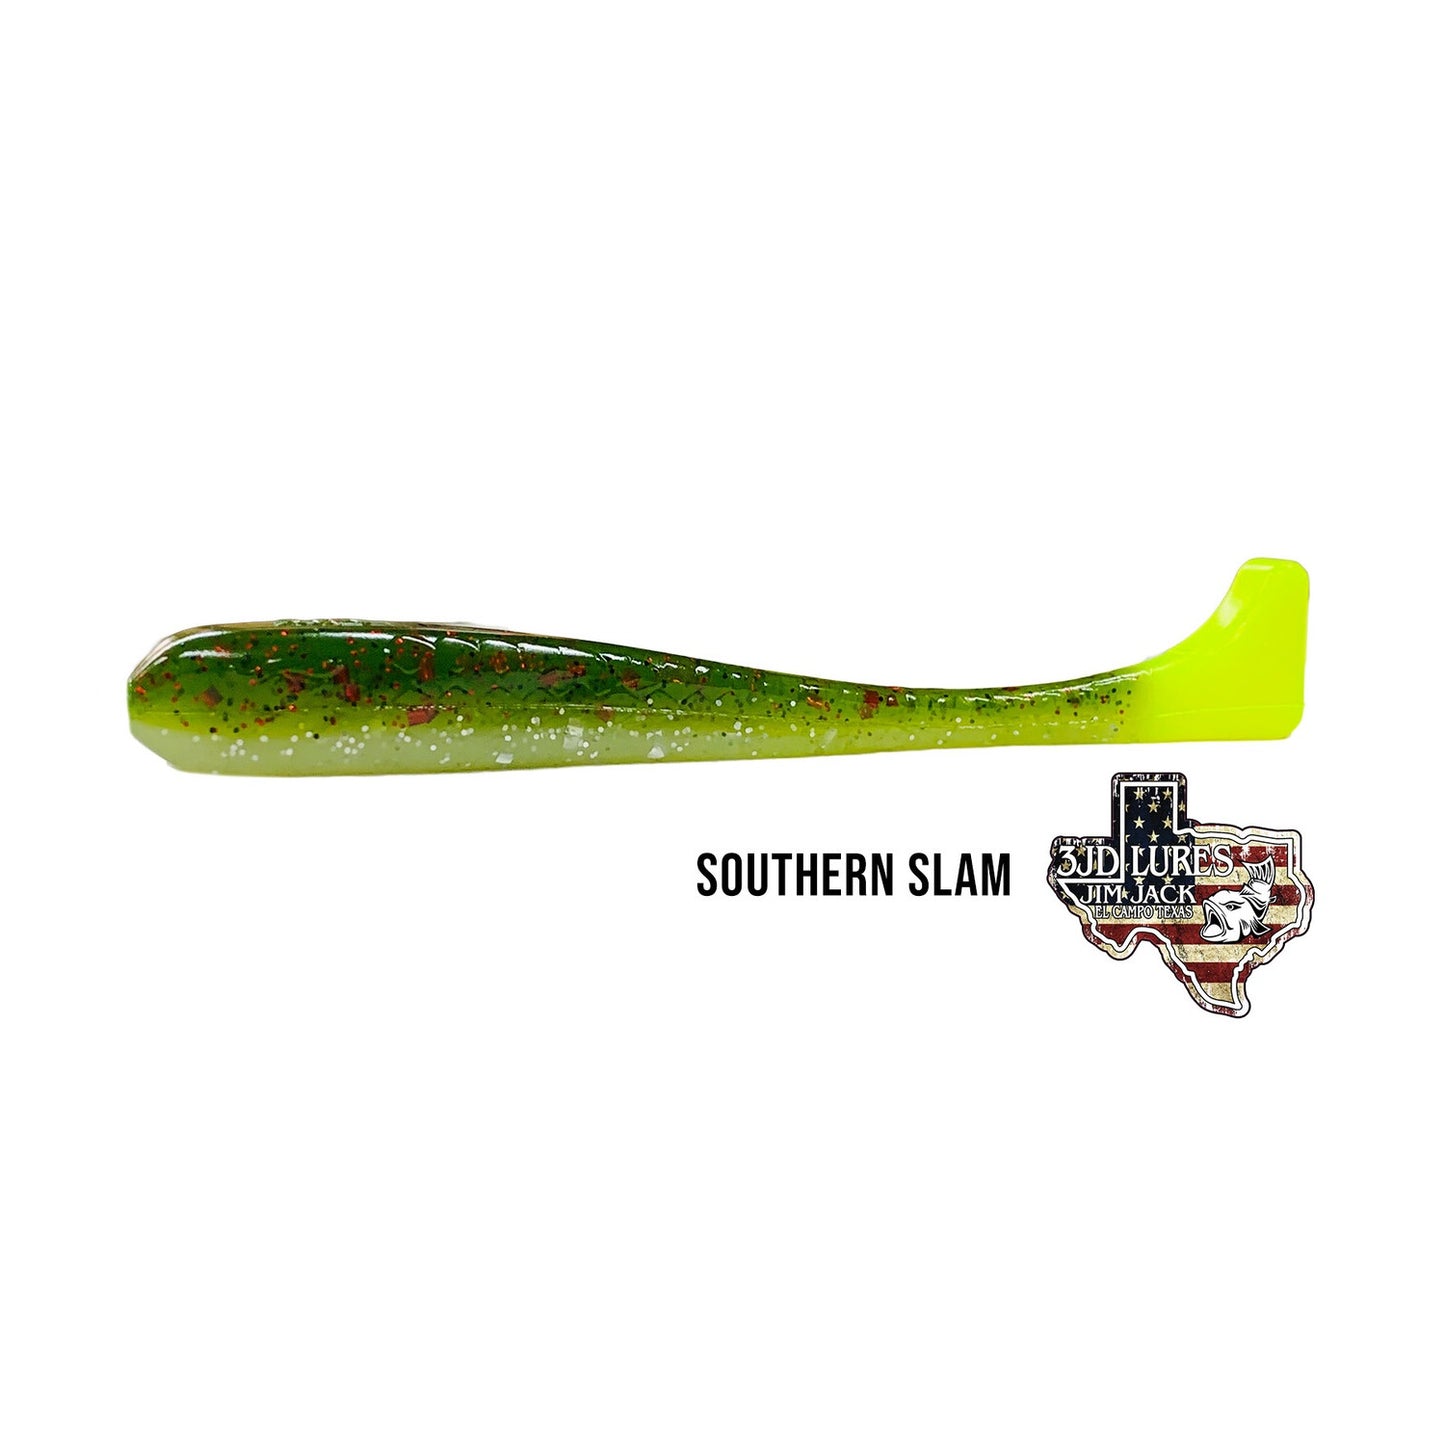 3JD Lures - Southern Slam